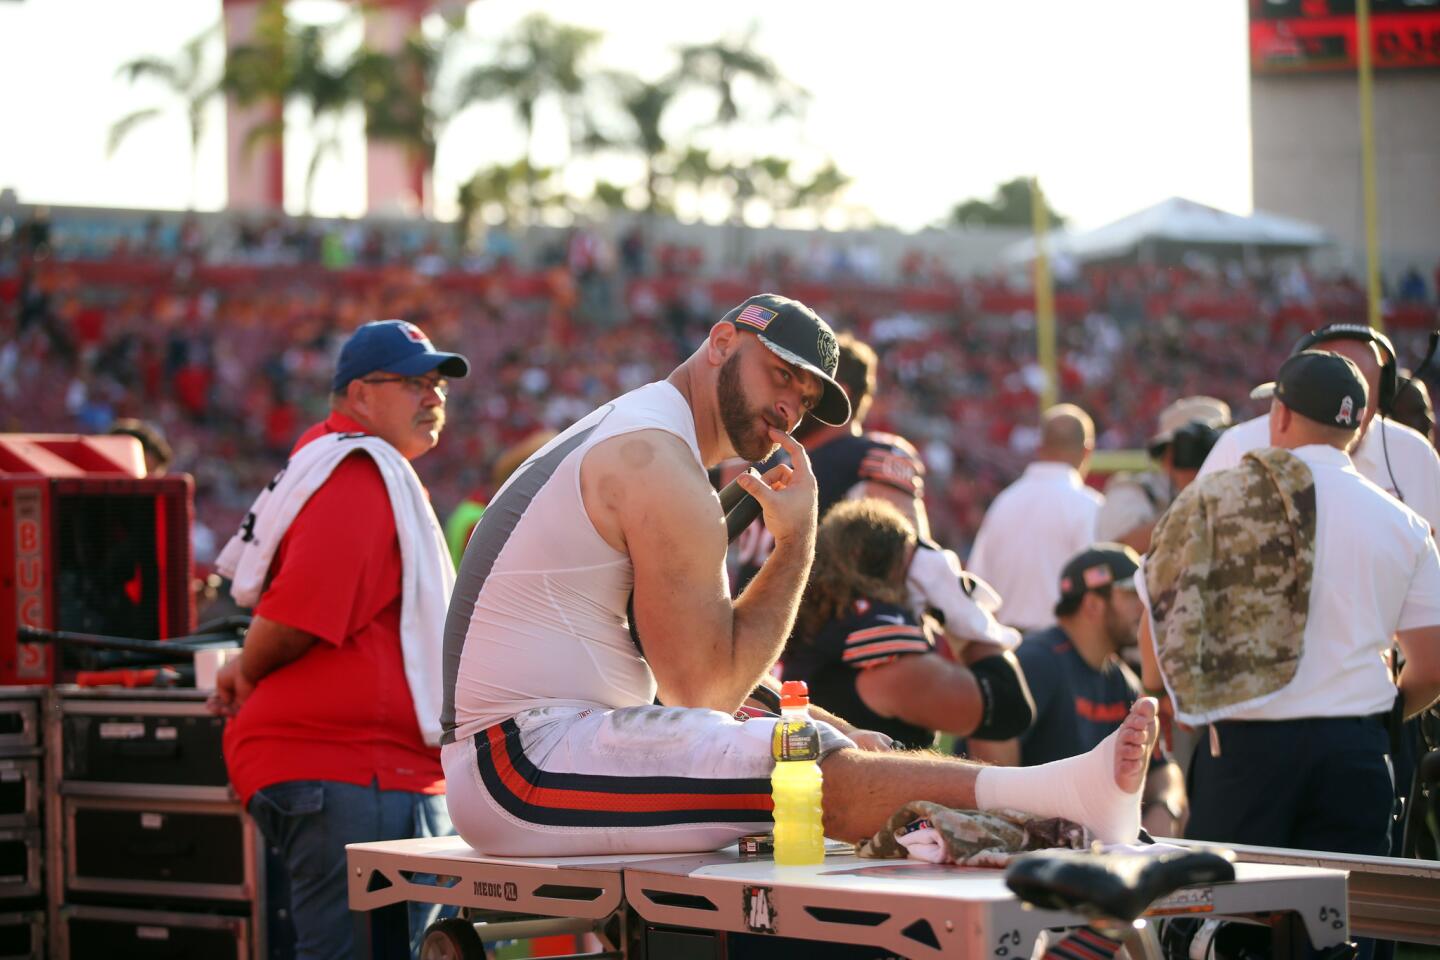 Chicago Bears offensive guard Kyle Long (75) sits on the bench after his injury on Nov. 13, 2016 at Raymond James Stadium in Tampa, Fla. The Bears lost to the Bucs, 36-10.